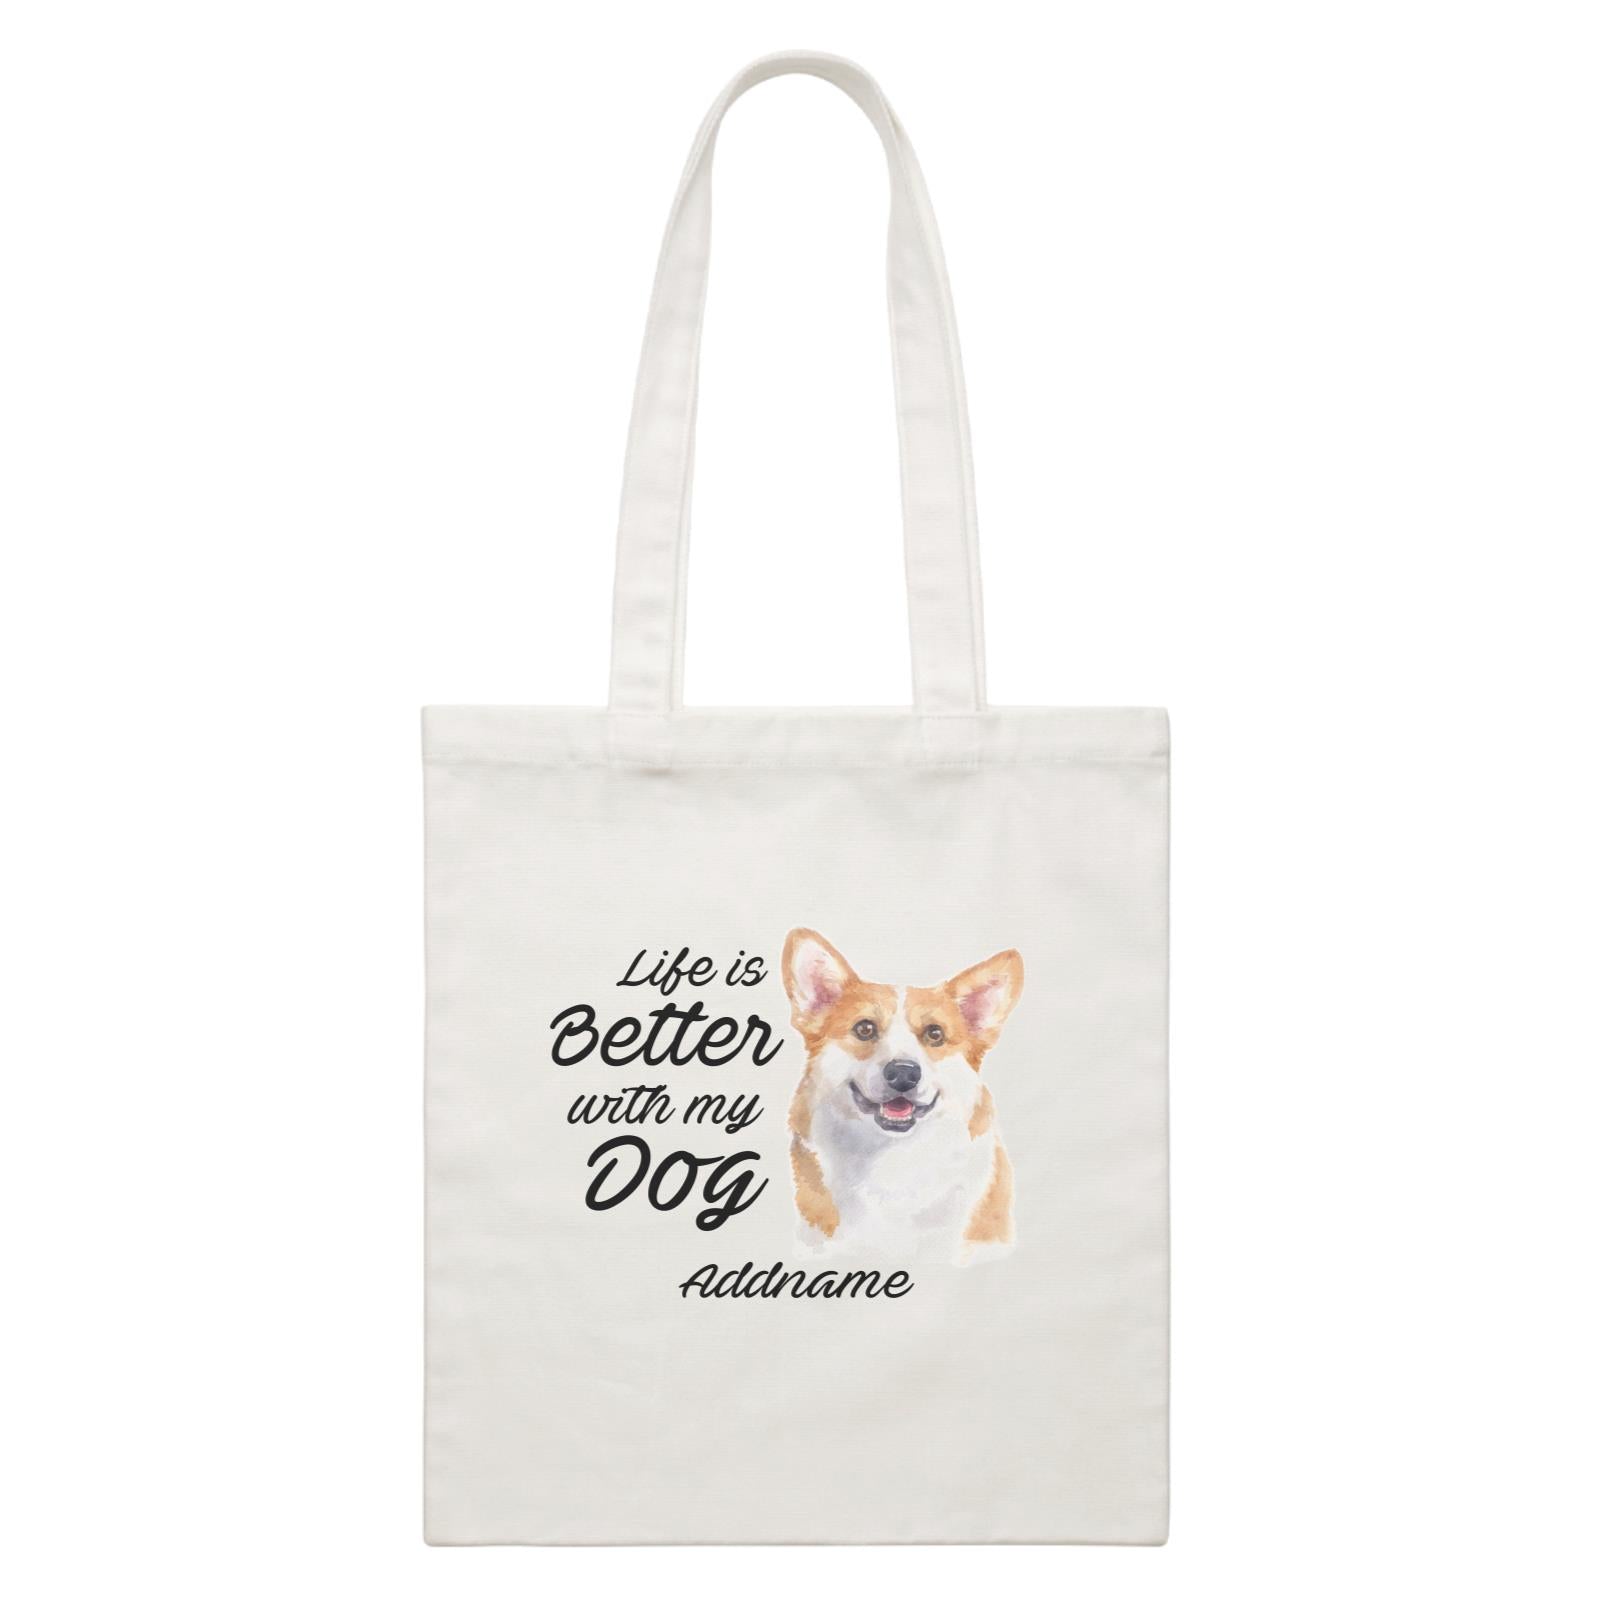 Watercolor Life is Better With My Dog Welsh Corgi Smile Addname White Canvas Bag